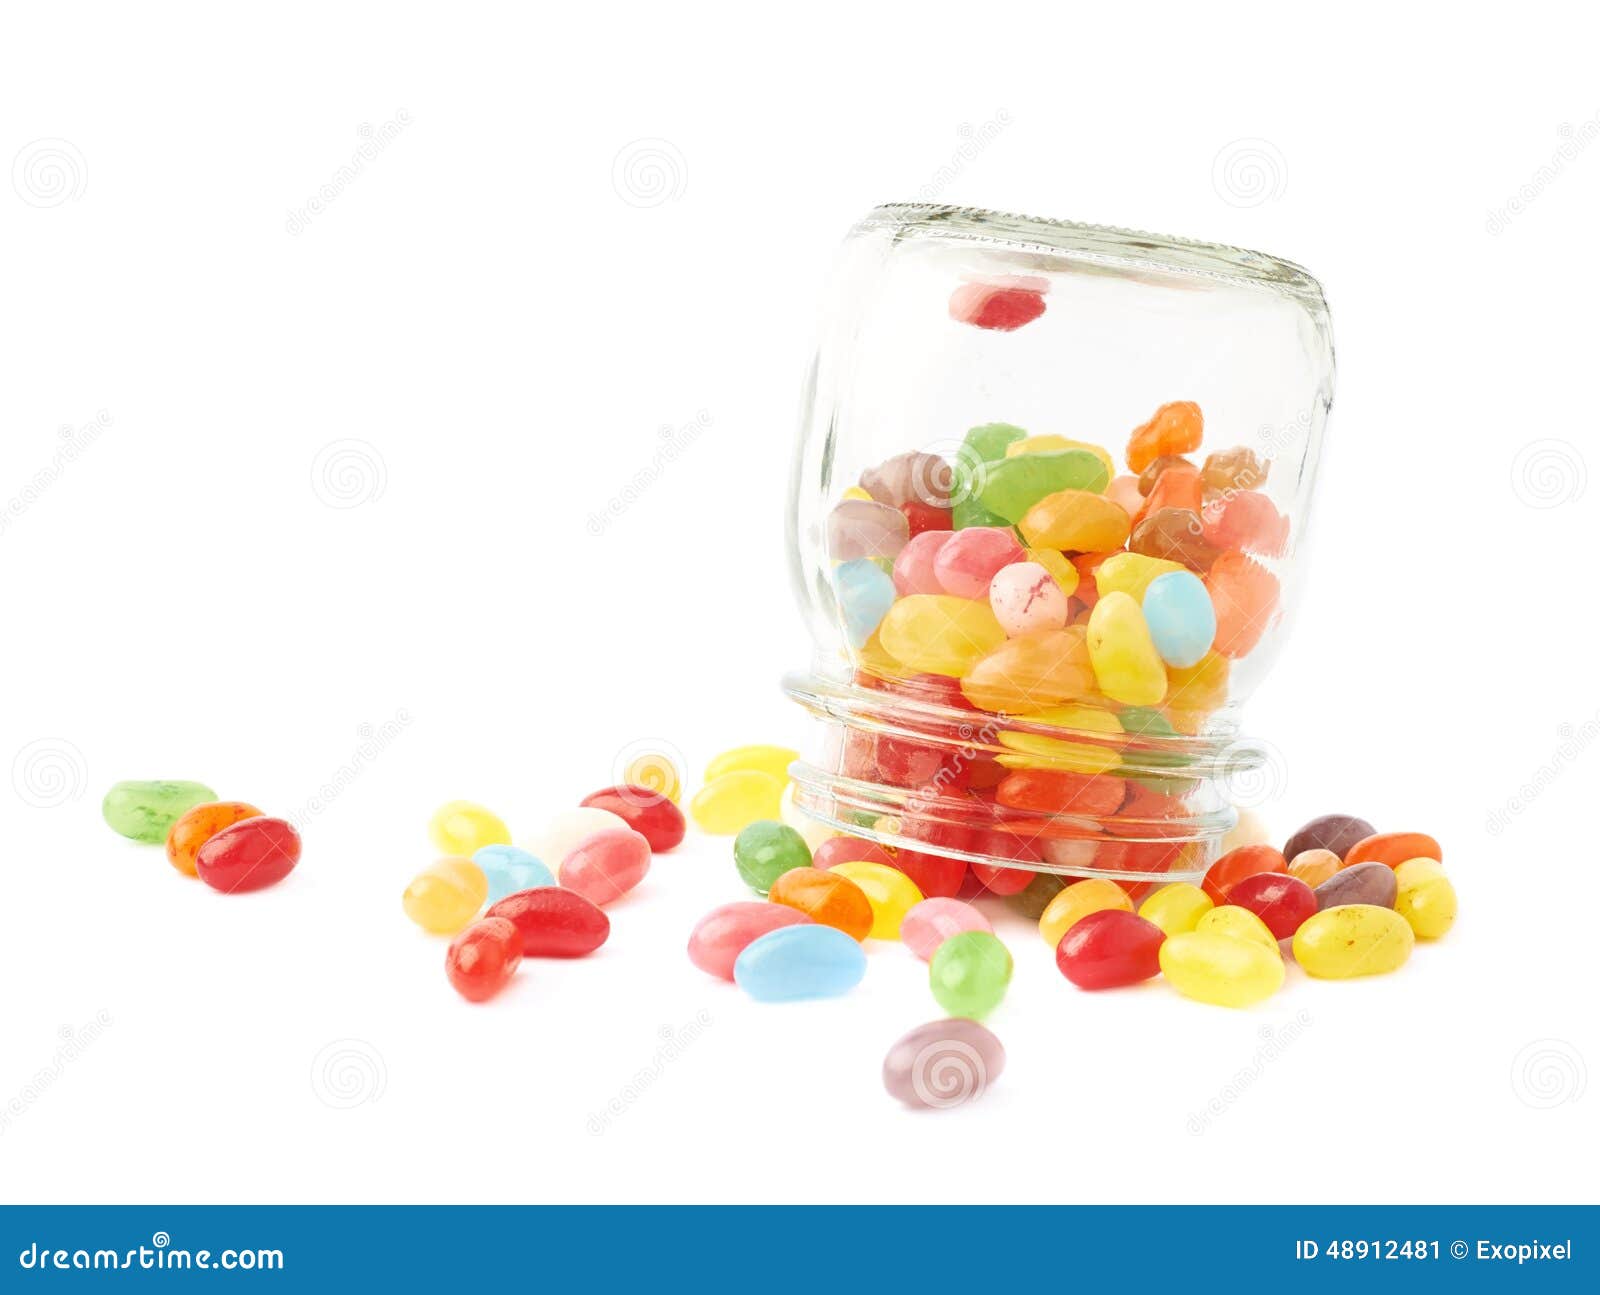 Jelly Bean Candies Spilled Out Of Jar Stock Photo - Image: 48912481